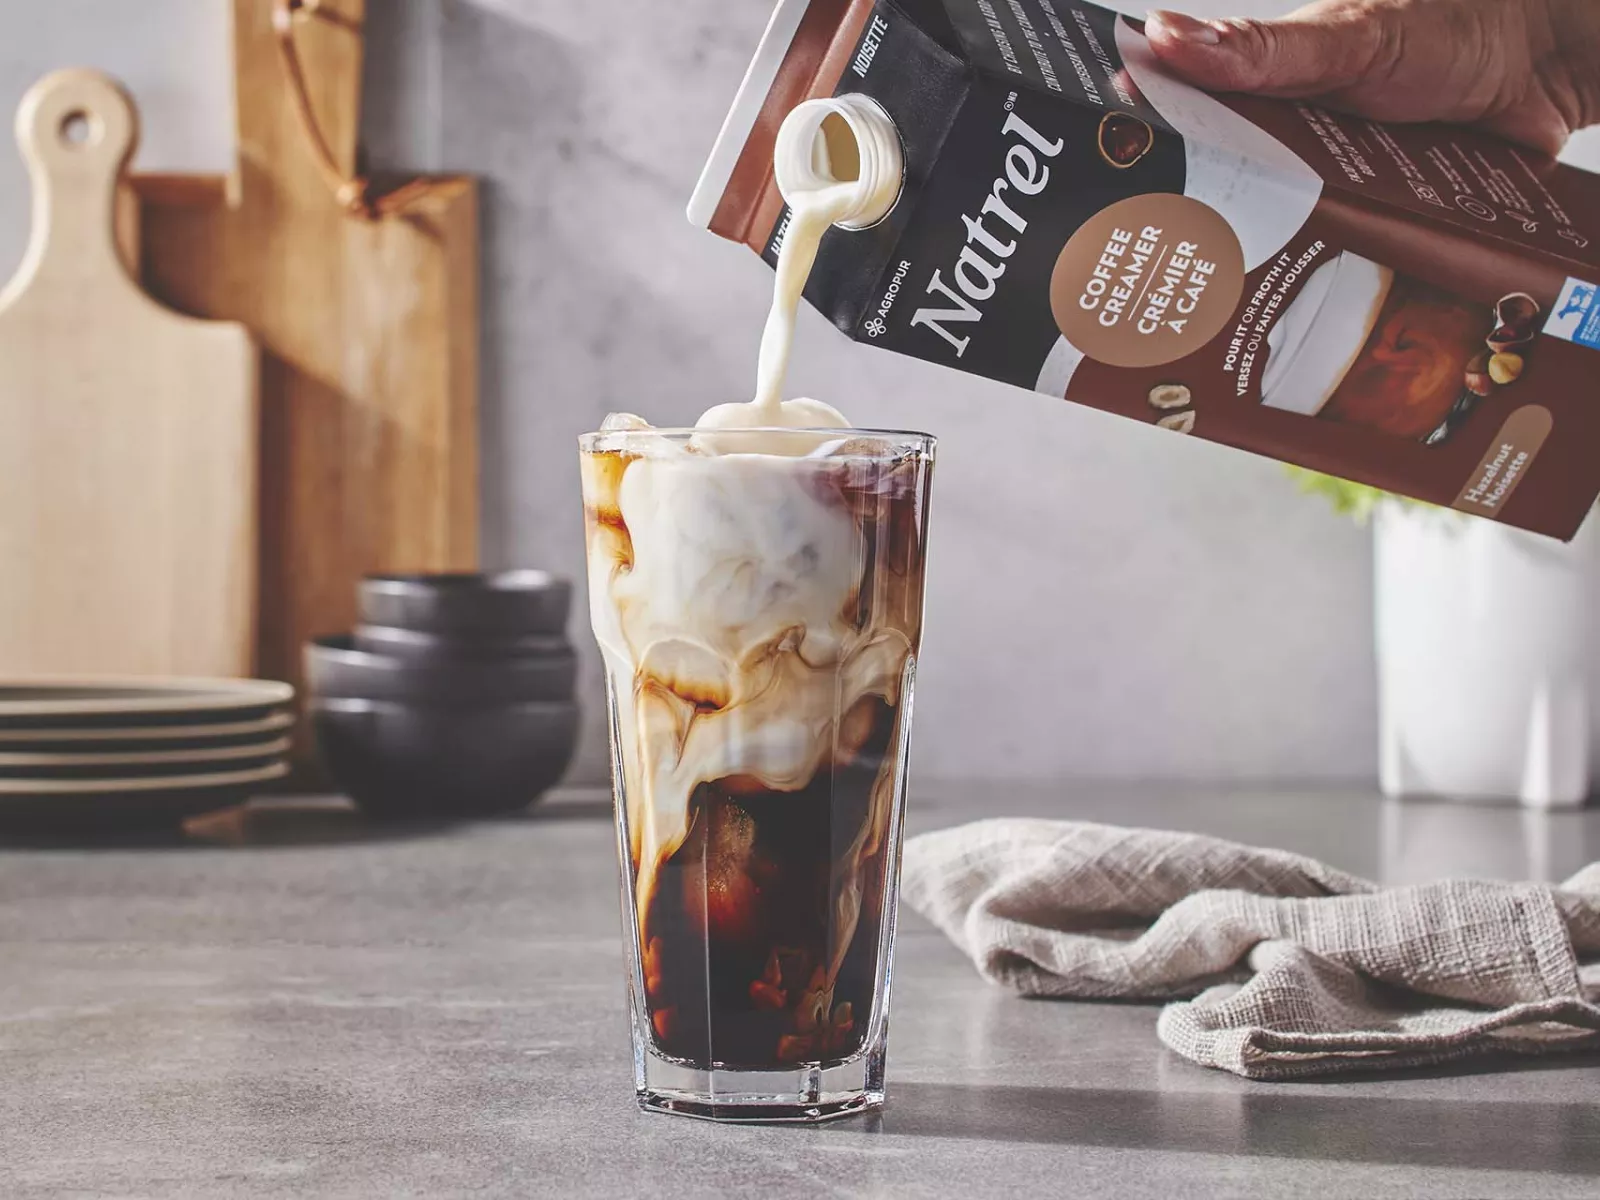 Flavored express iced coffee